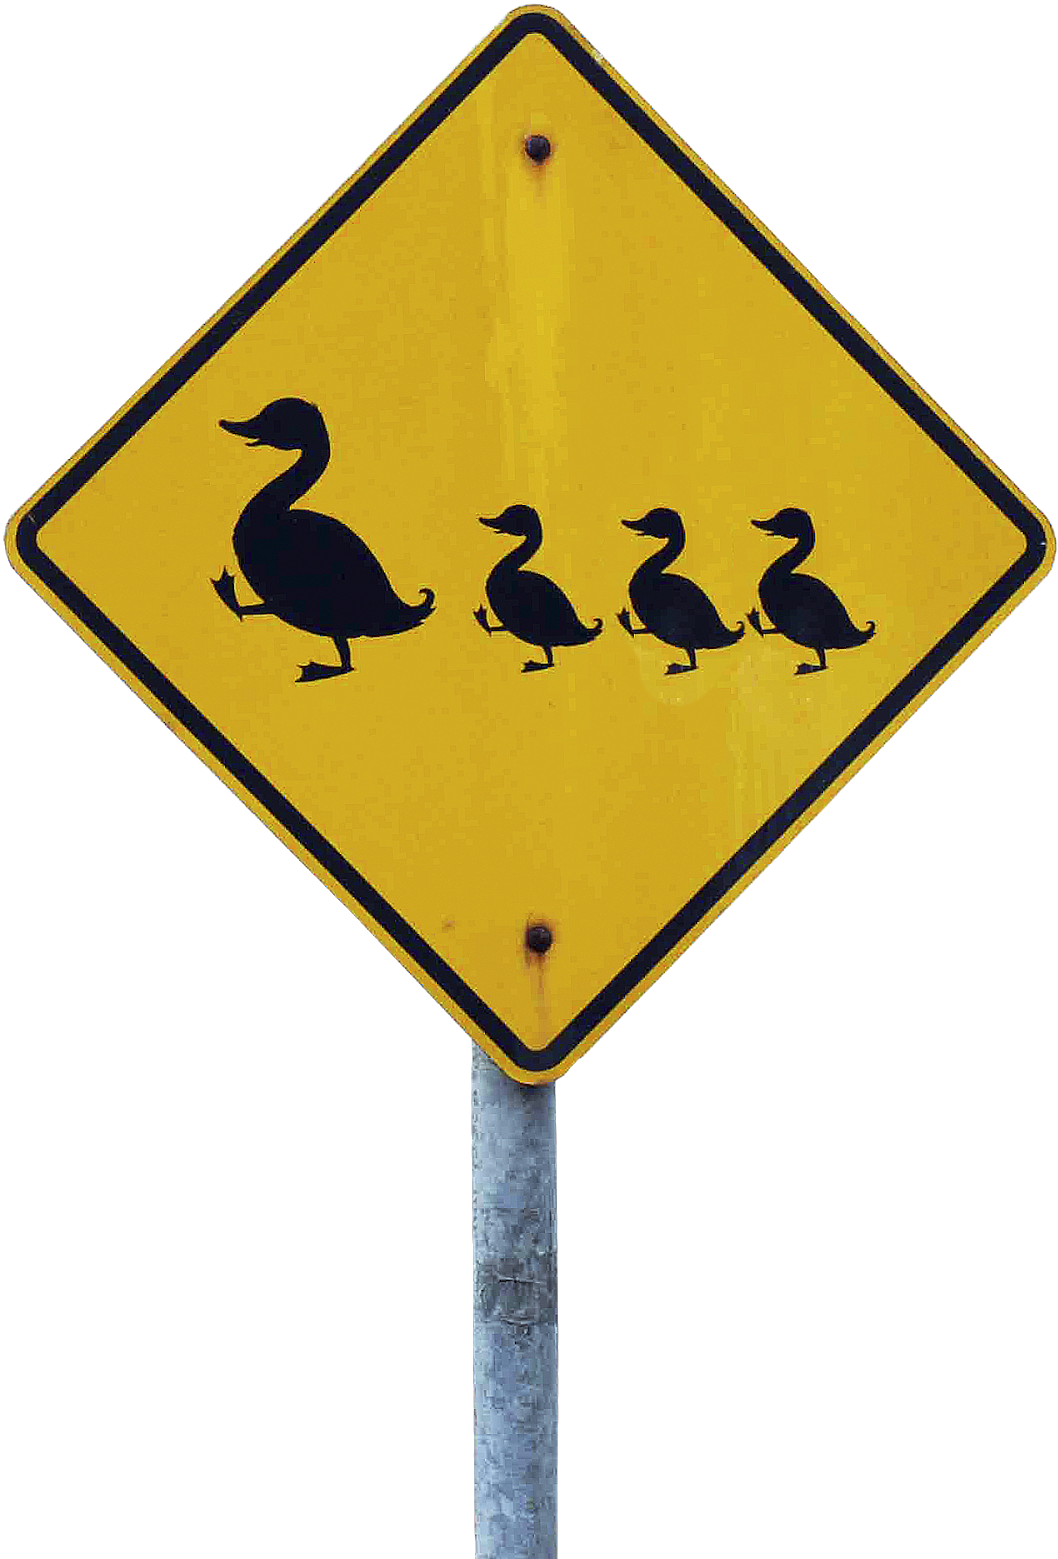 Crossing The Road On The Zebra Crossing Were A Duck - Kangaroo Road Sign (1200x1600)